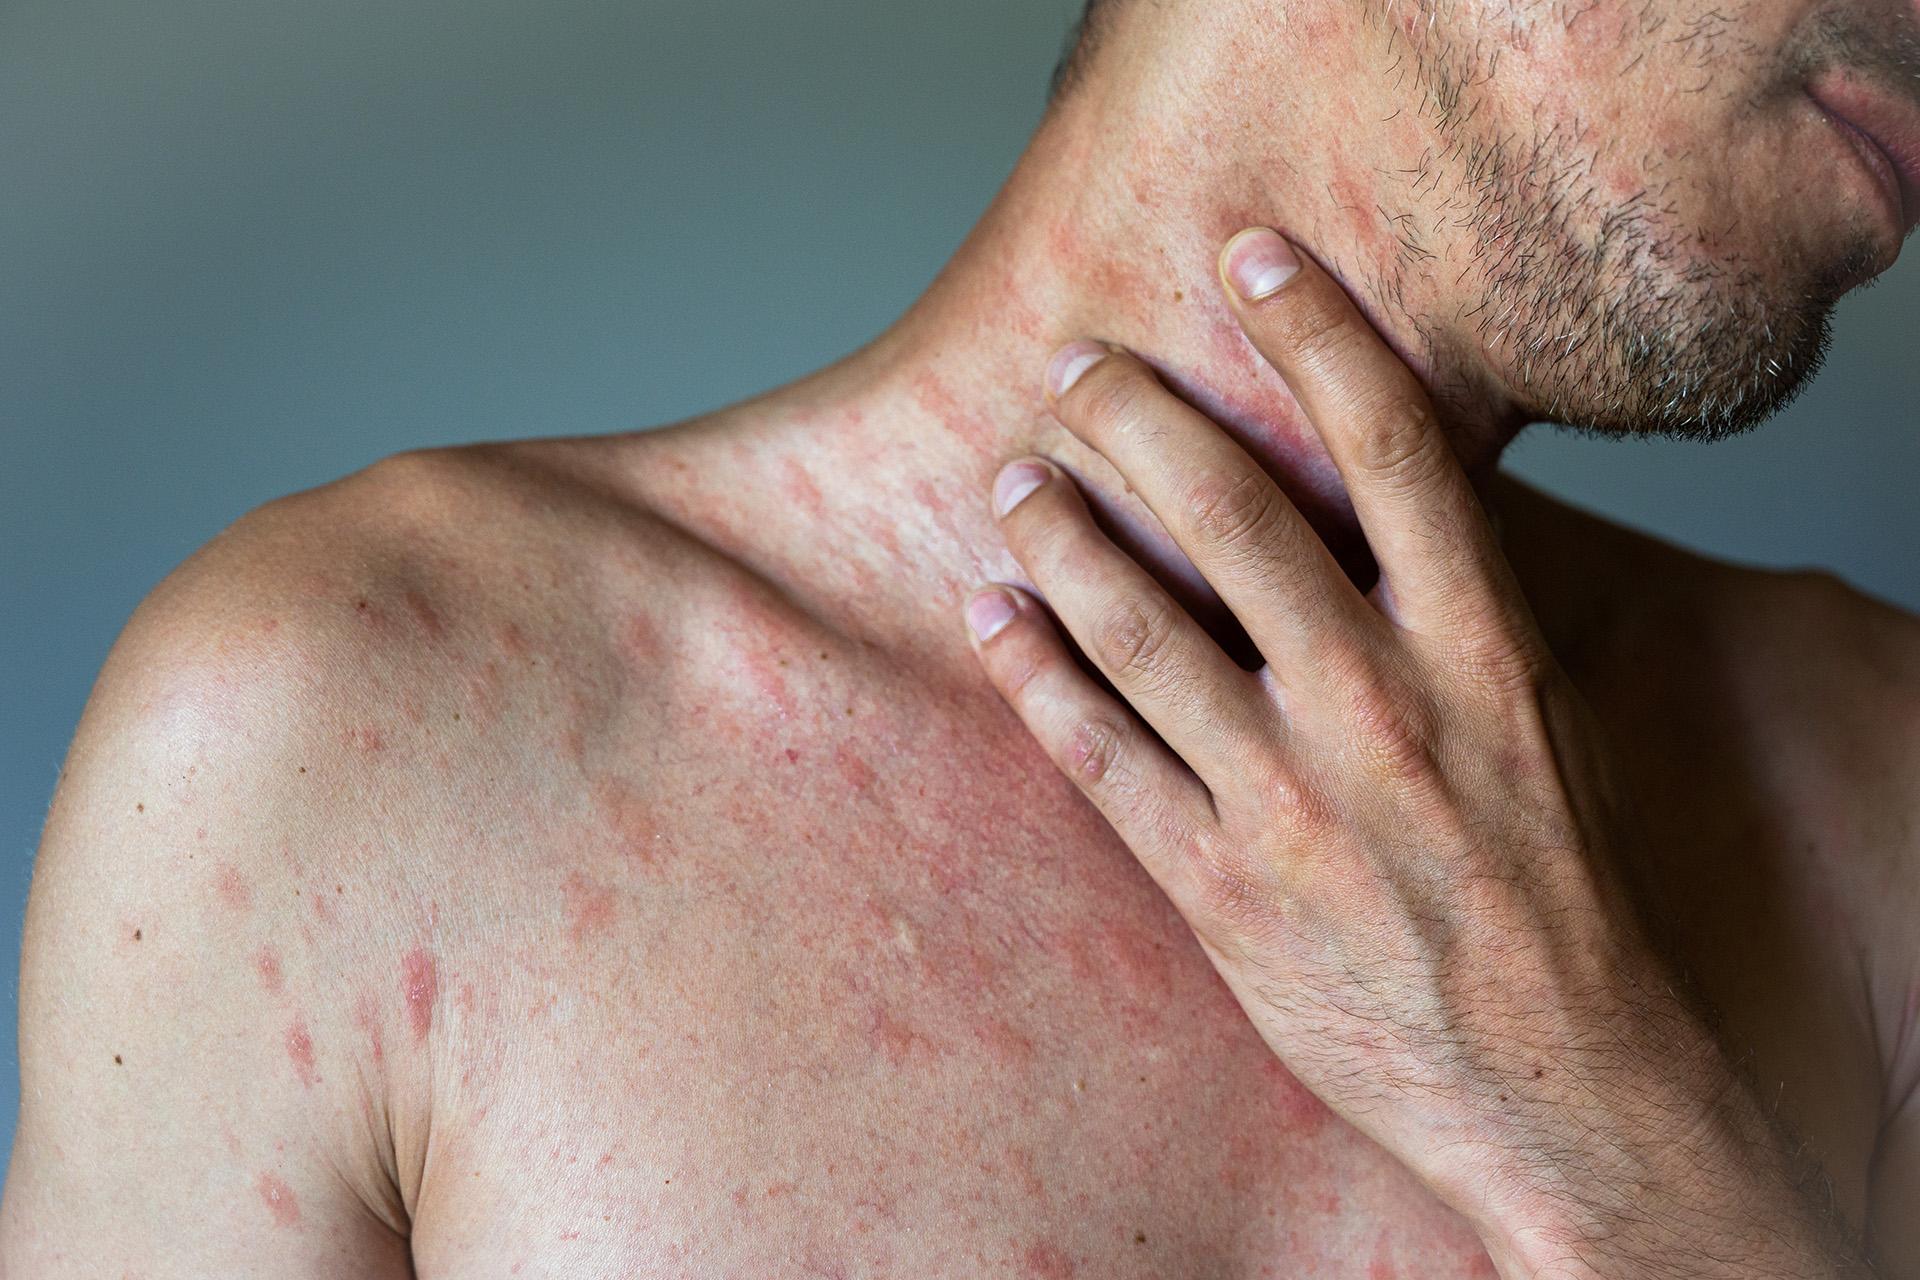 Hives On Skin: Symptoms, Causes, and Treatment